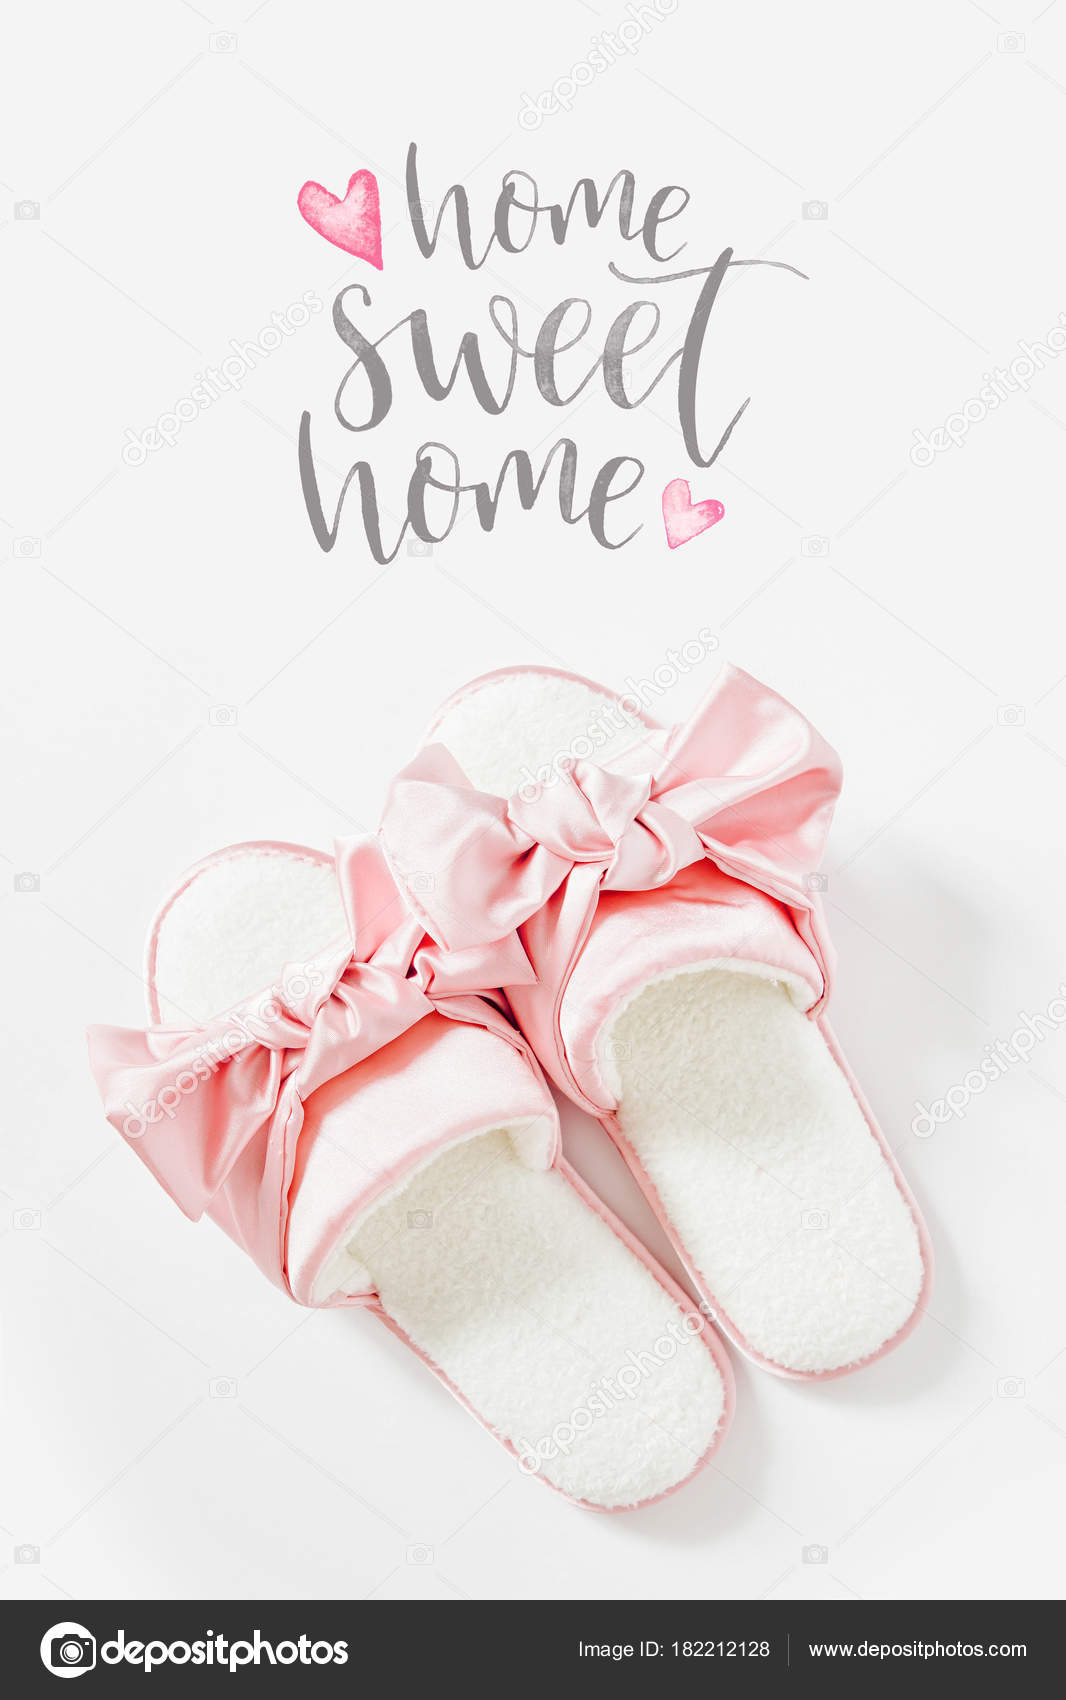 sweet home slippers